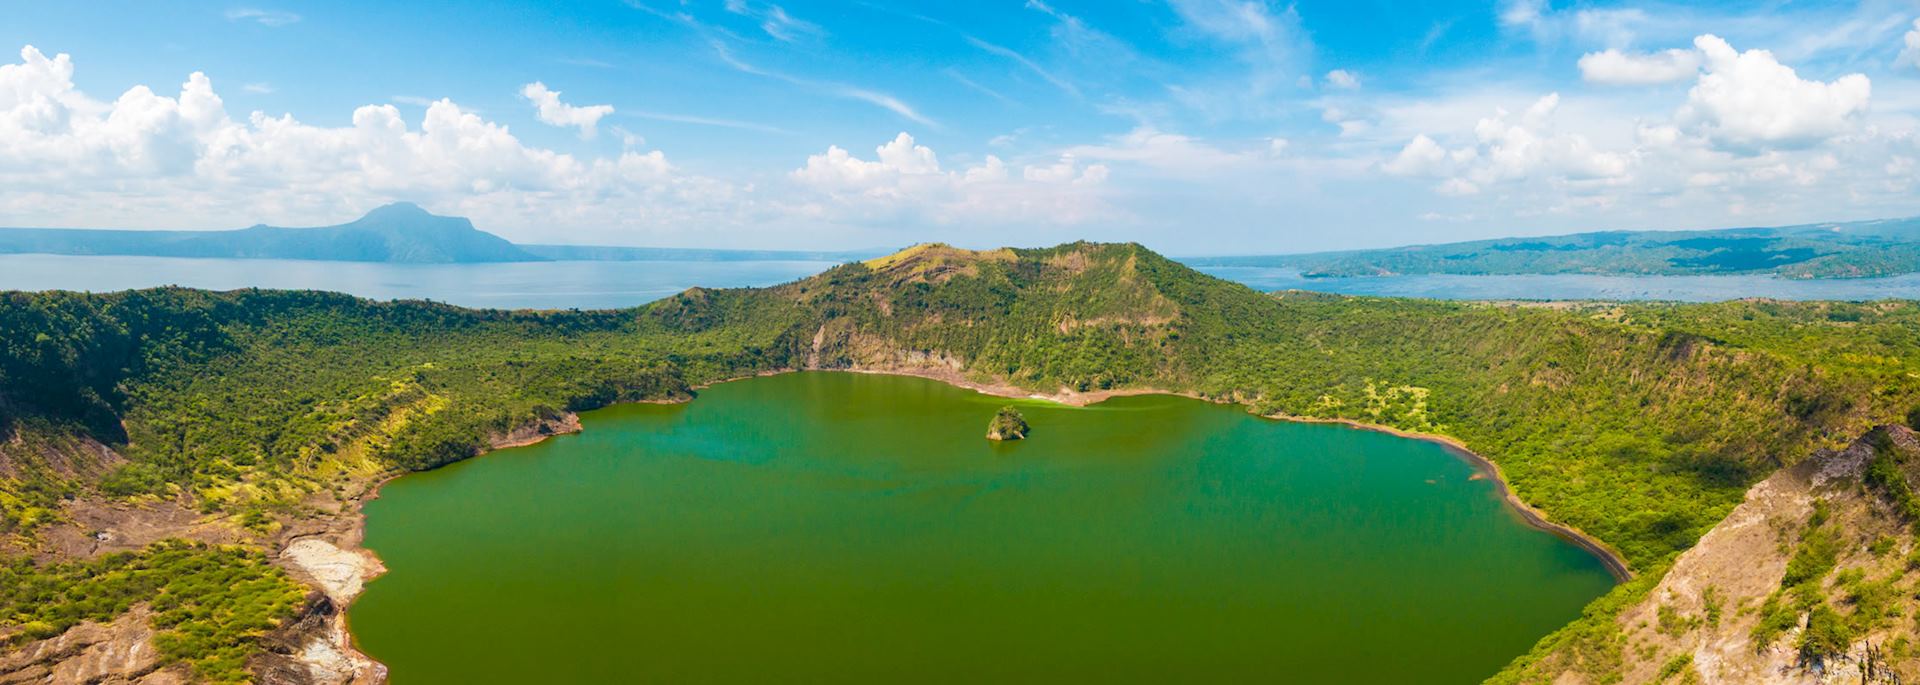 Vulcan Point Island and Crater Lake in Batangas, Southern Luzon